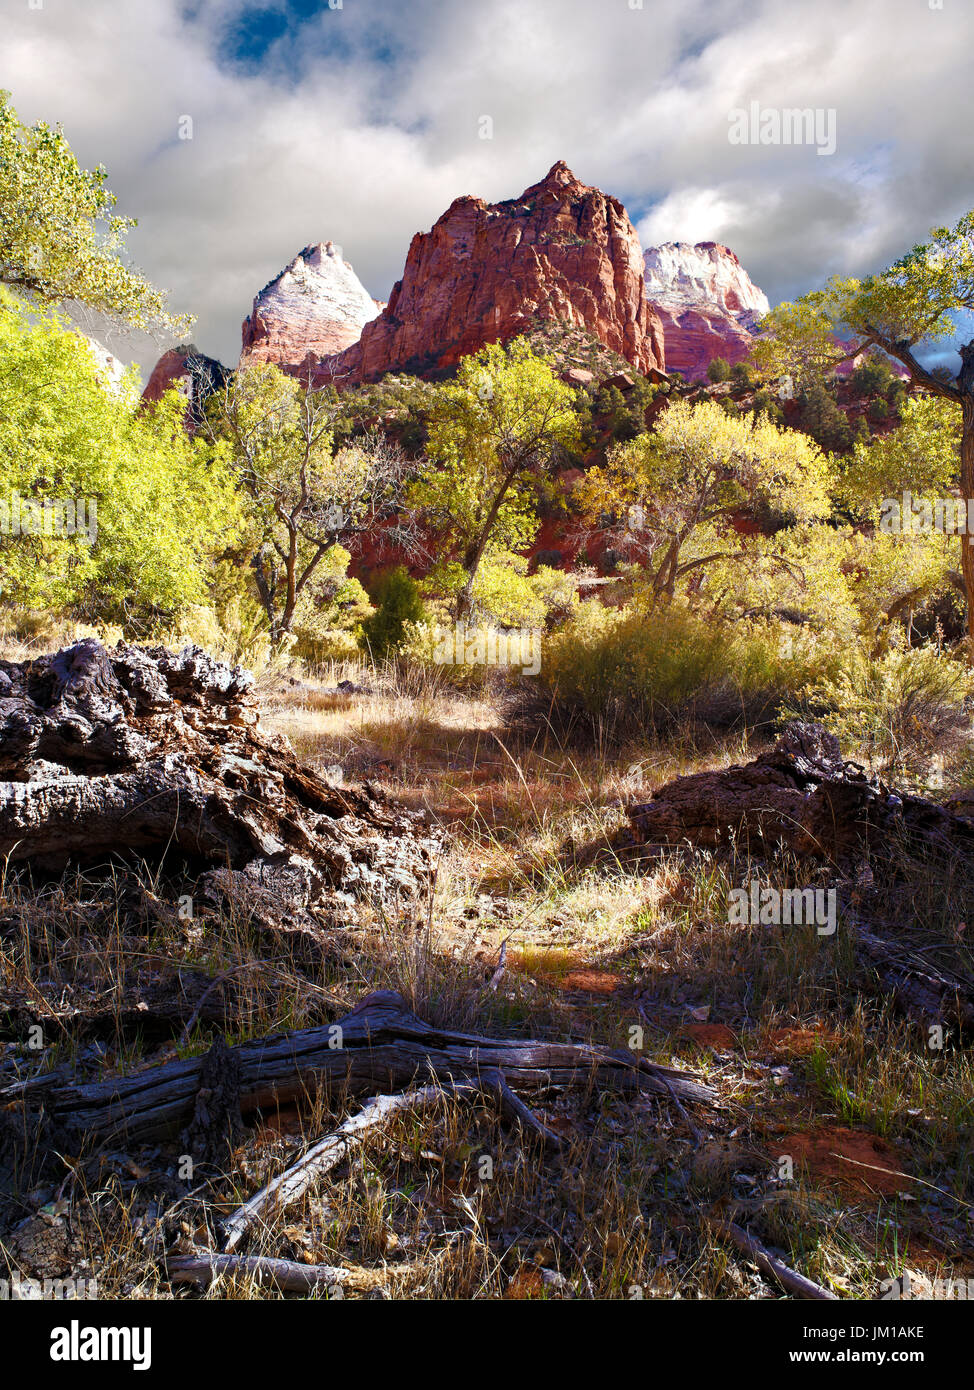 A view, in the fall season, of the mountainous landscape of Zion National Park, Utah, USA Stock Photo